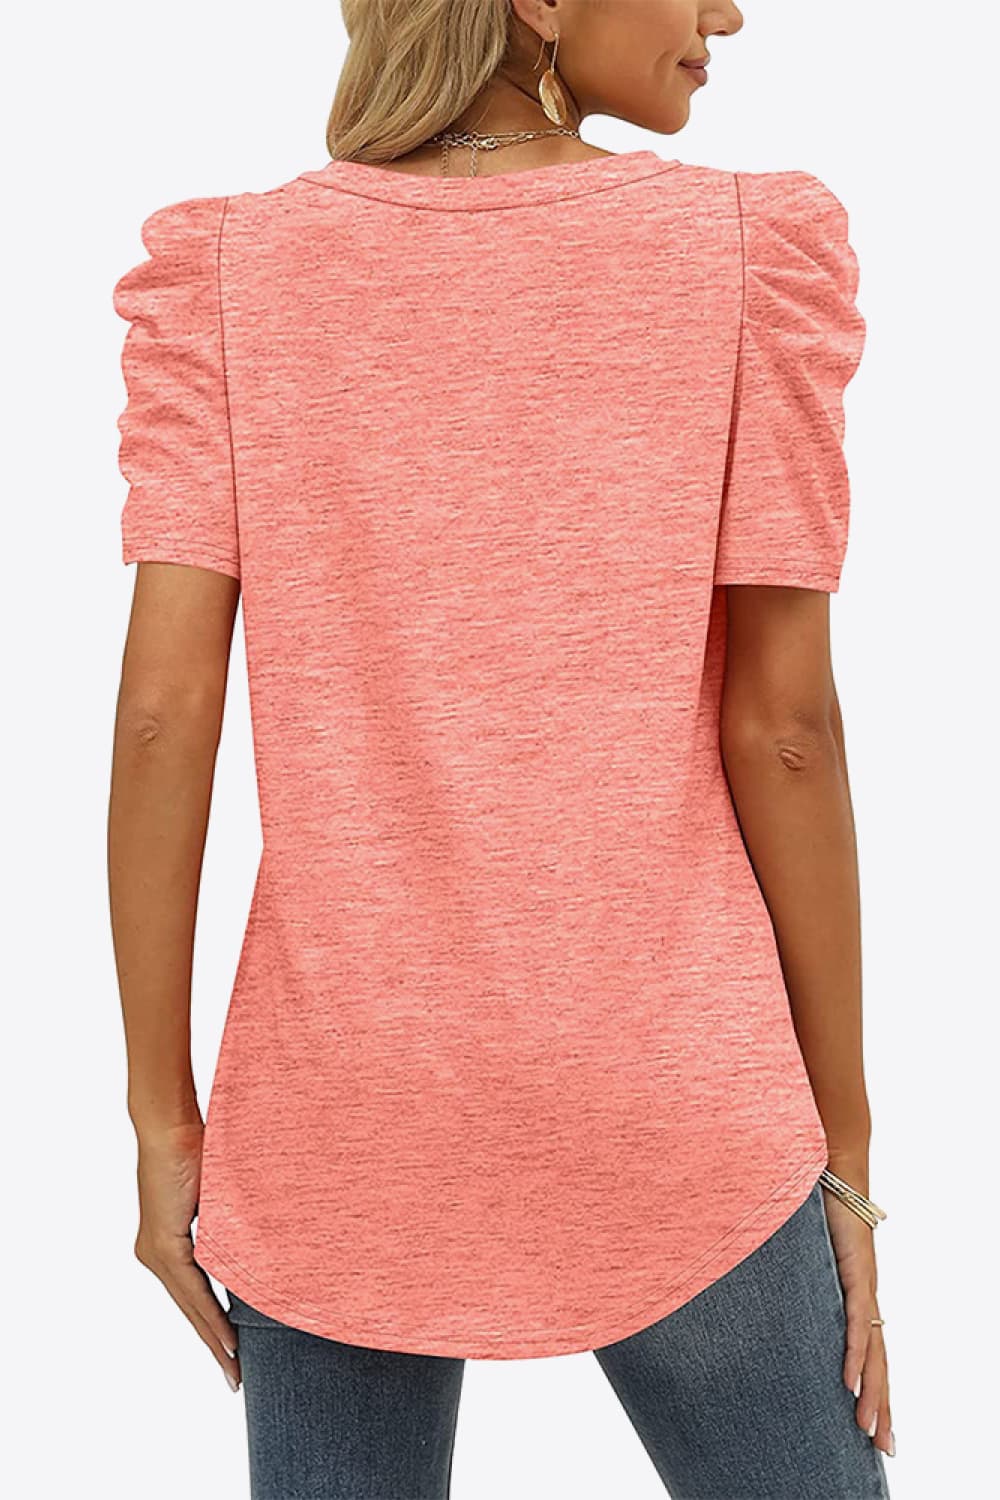 V-Neck Puff Sleeve Tee - 6 colors